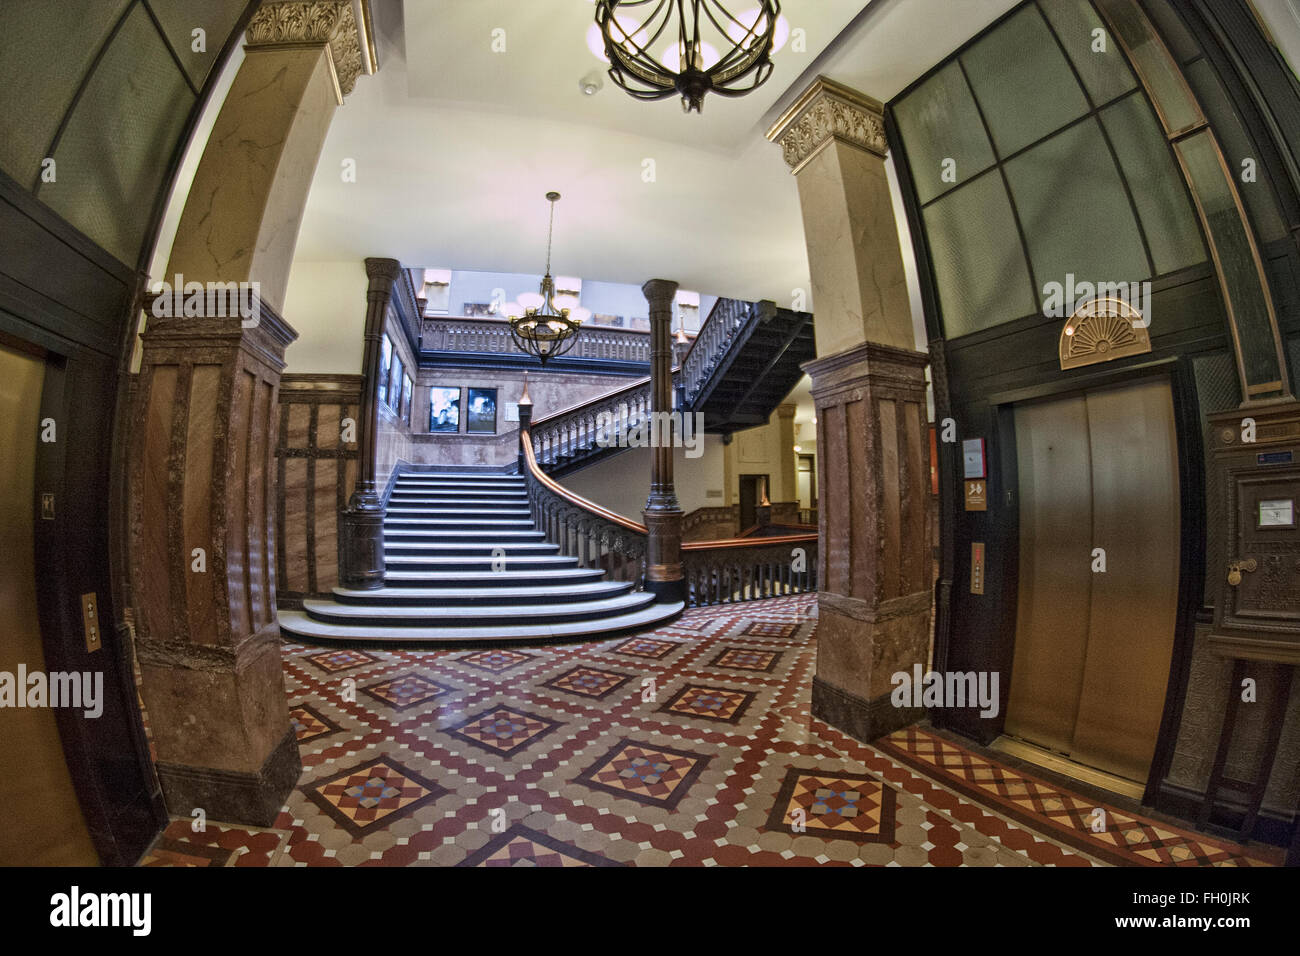 marble staircase in the hotel. many steep steps, a sharp turn on the stairs  down. natural stone on the stairs, expensive material, smooth texture  15582636 Stock Photo at Vecteezy